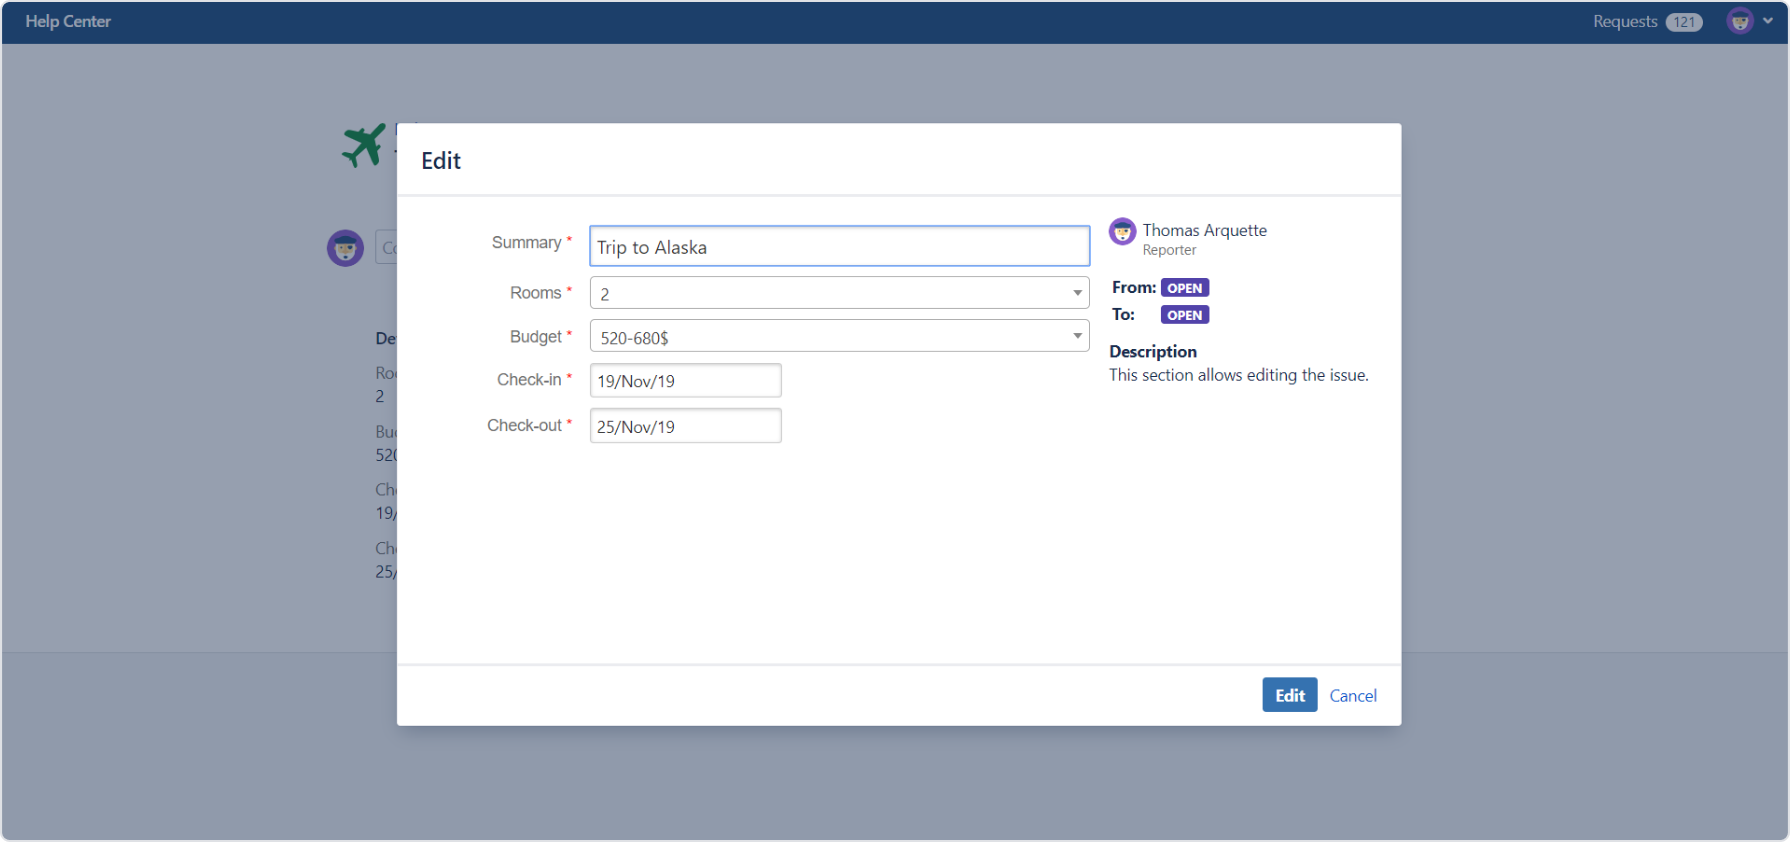 Hide empty fields option on the Customer Portal with Actions for Jira Service Management app